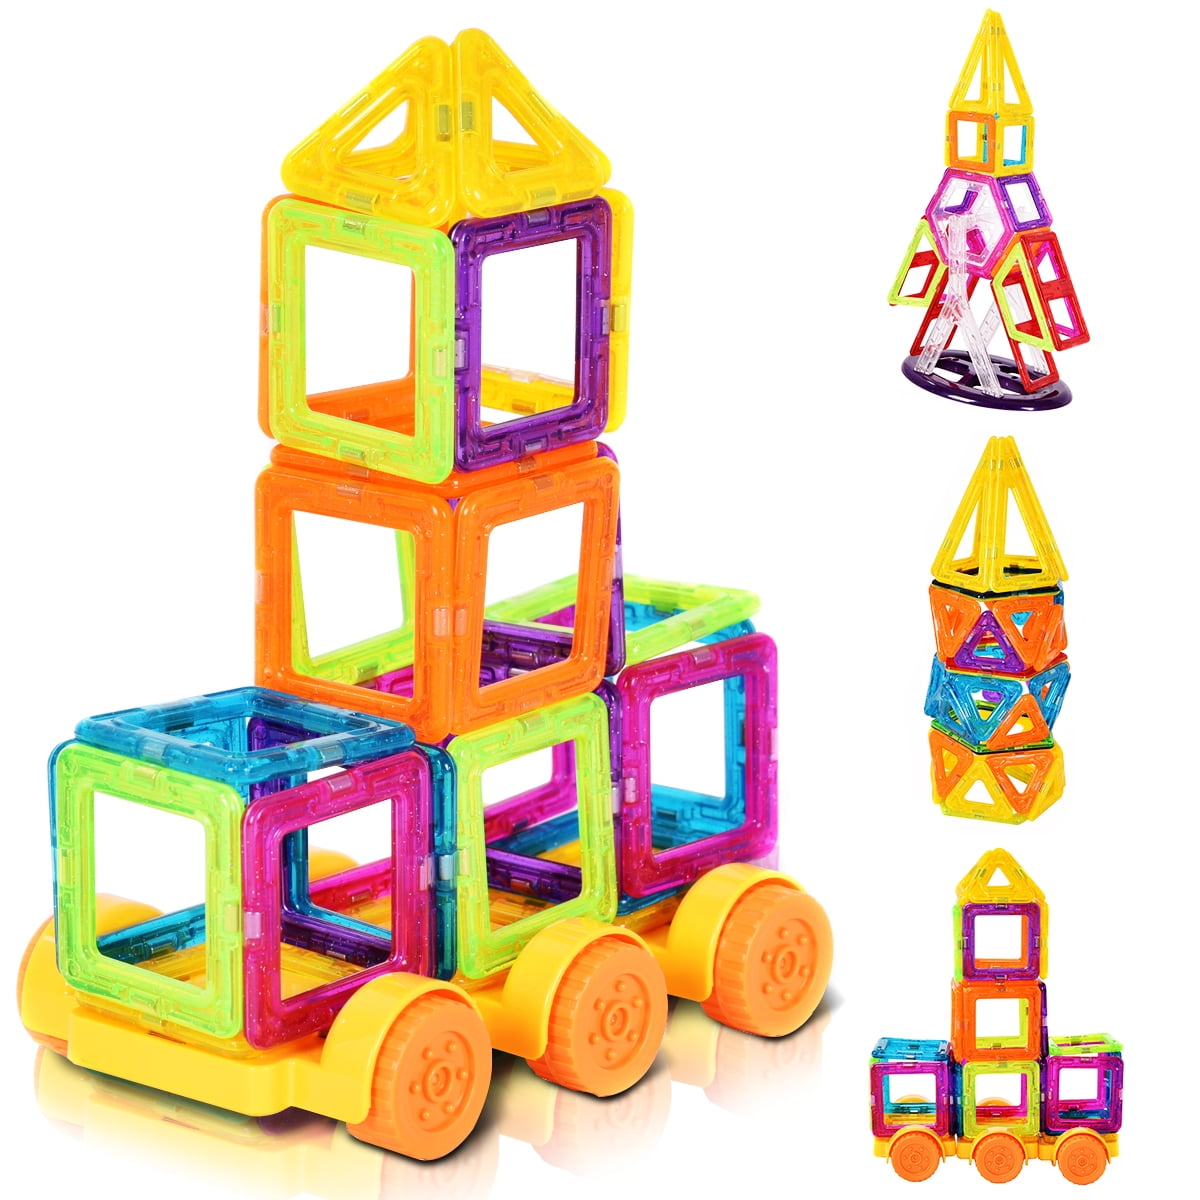 Magical Magnet Building Block Large Size Educational Toy For Kids Christmas Gift 